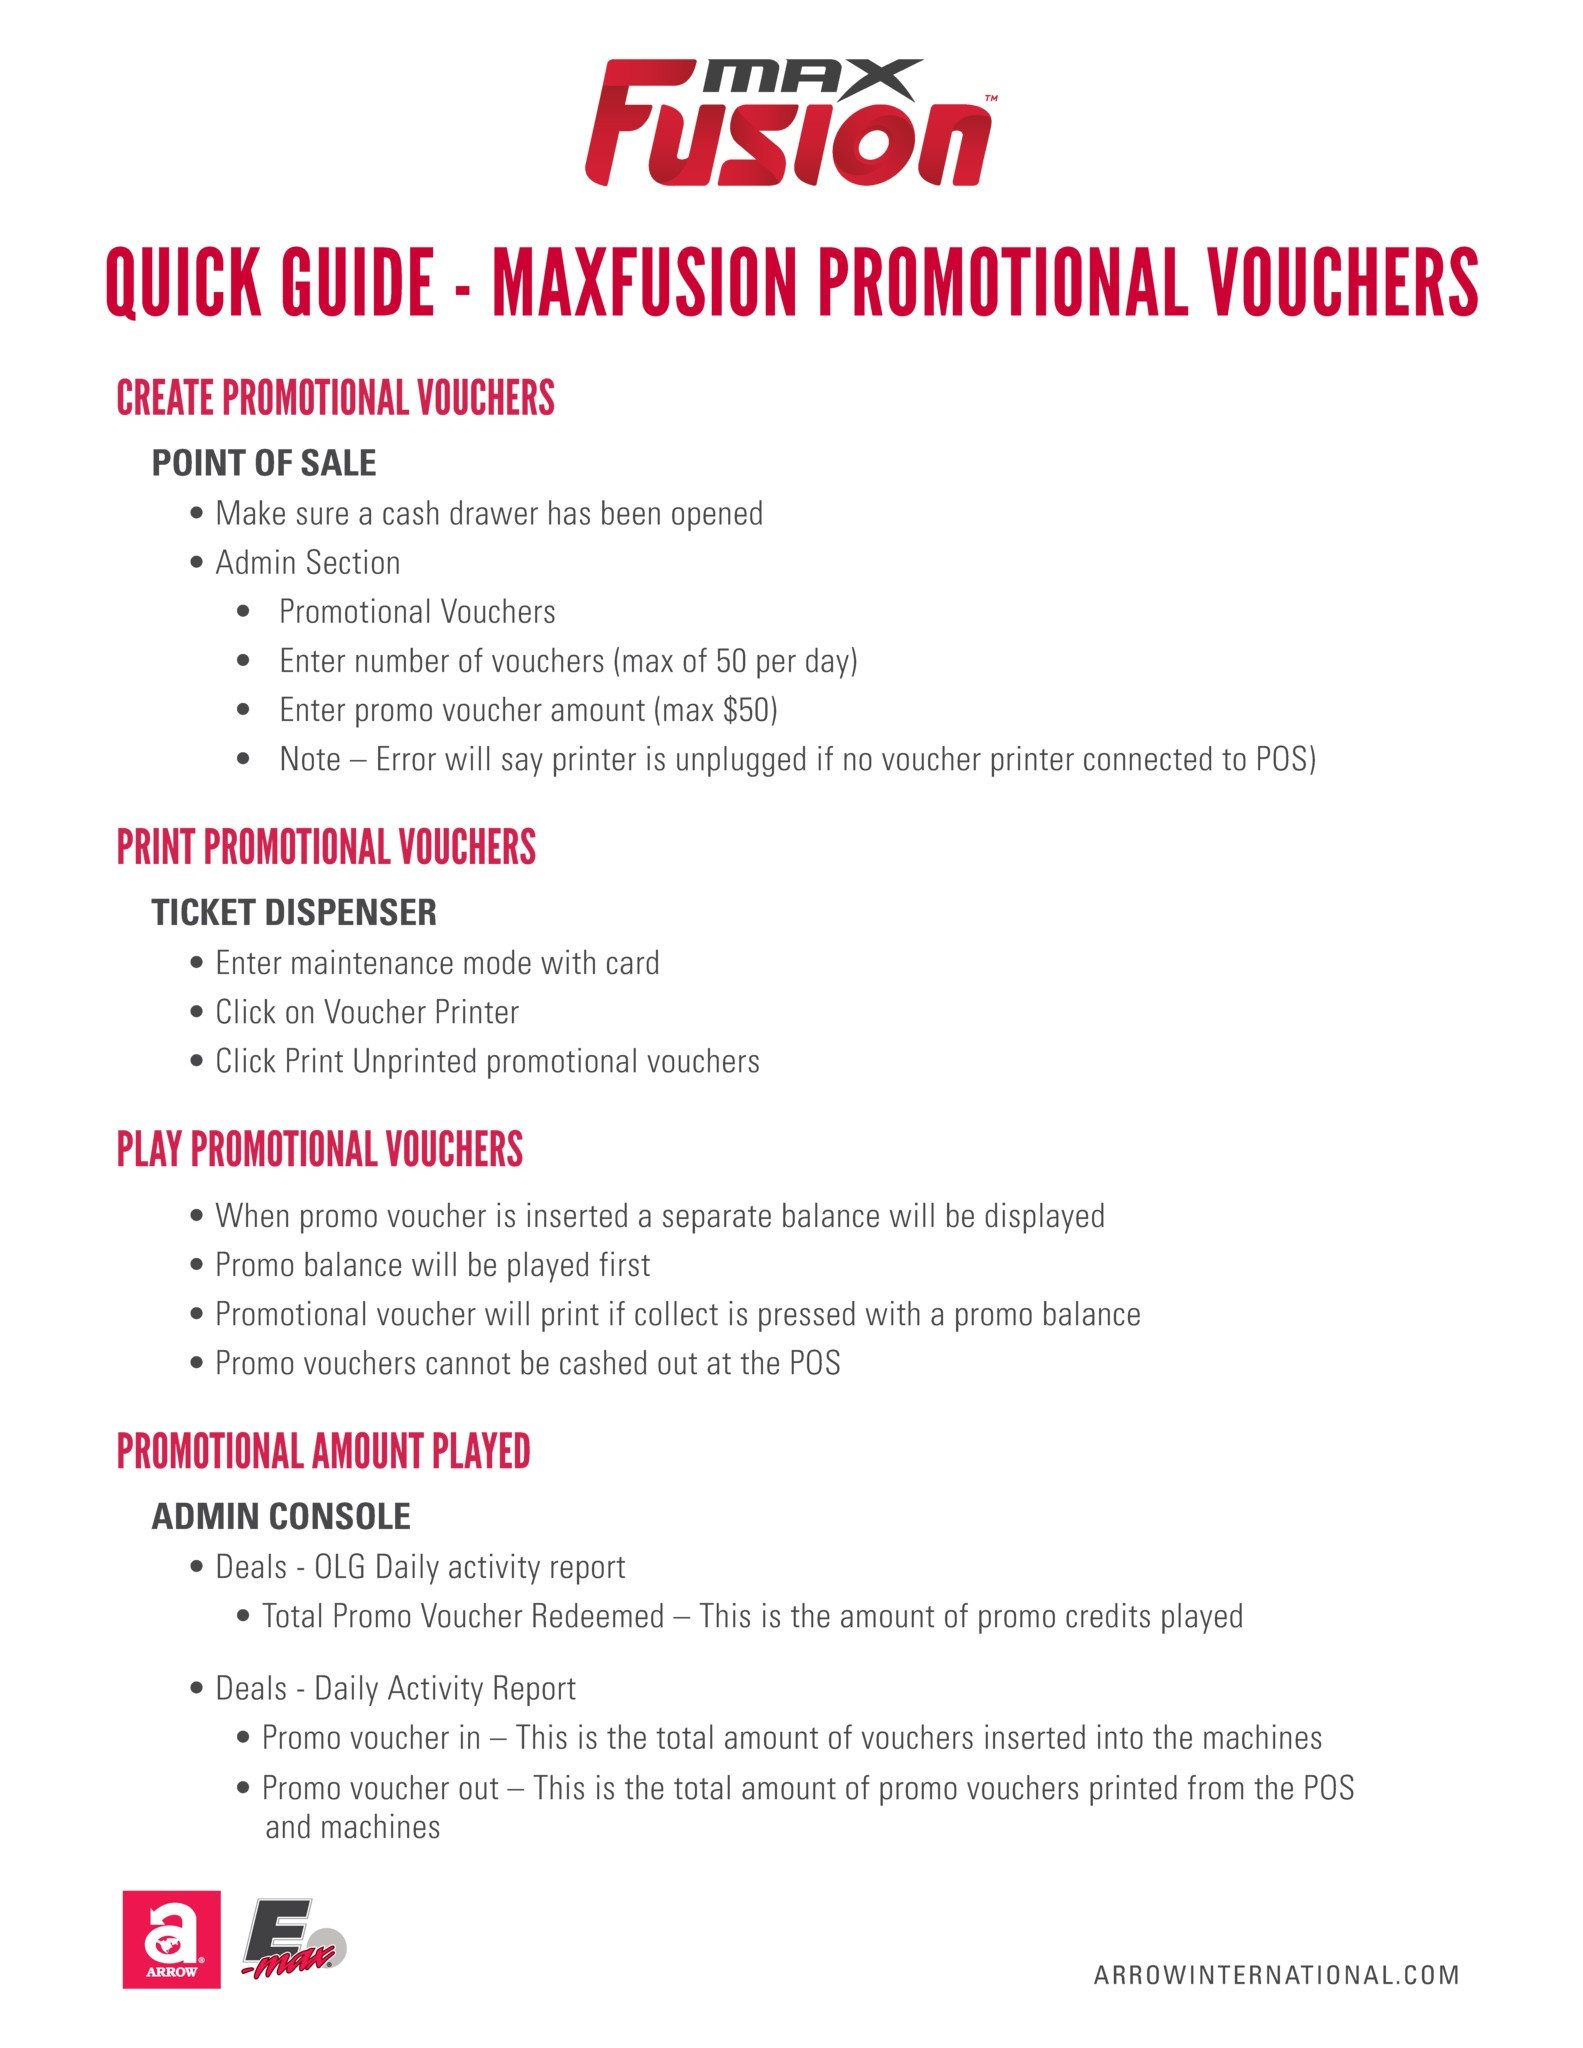 Maxfusion Promotional Vouchers Quick Guide 